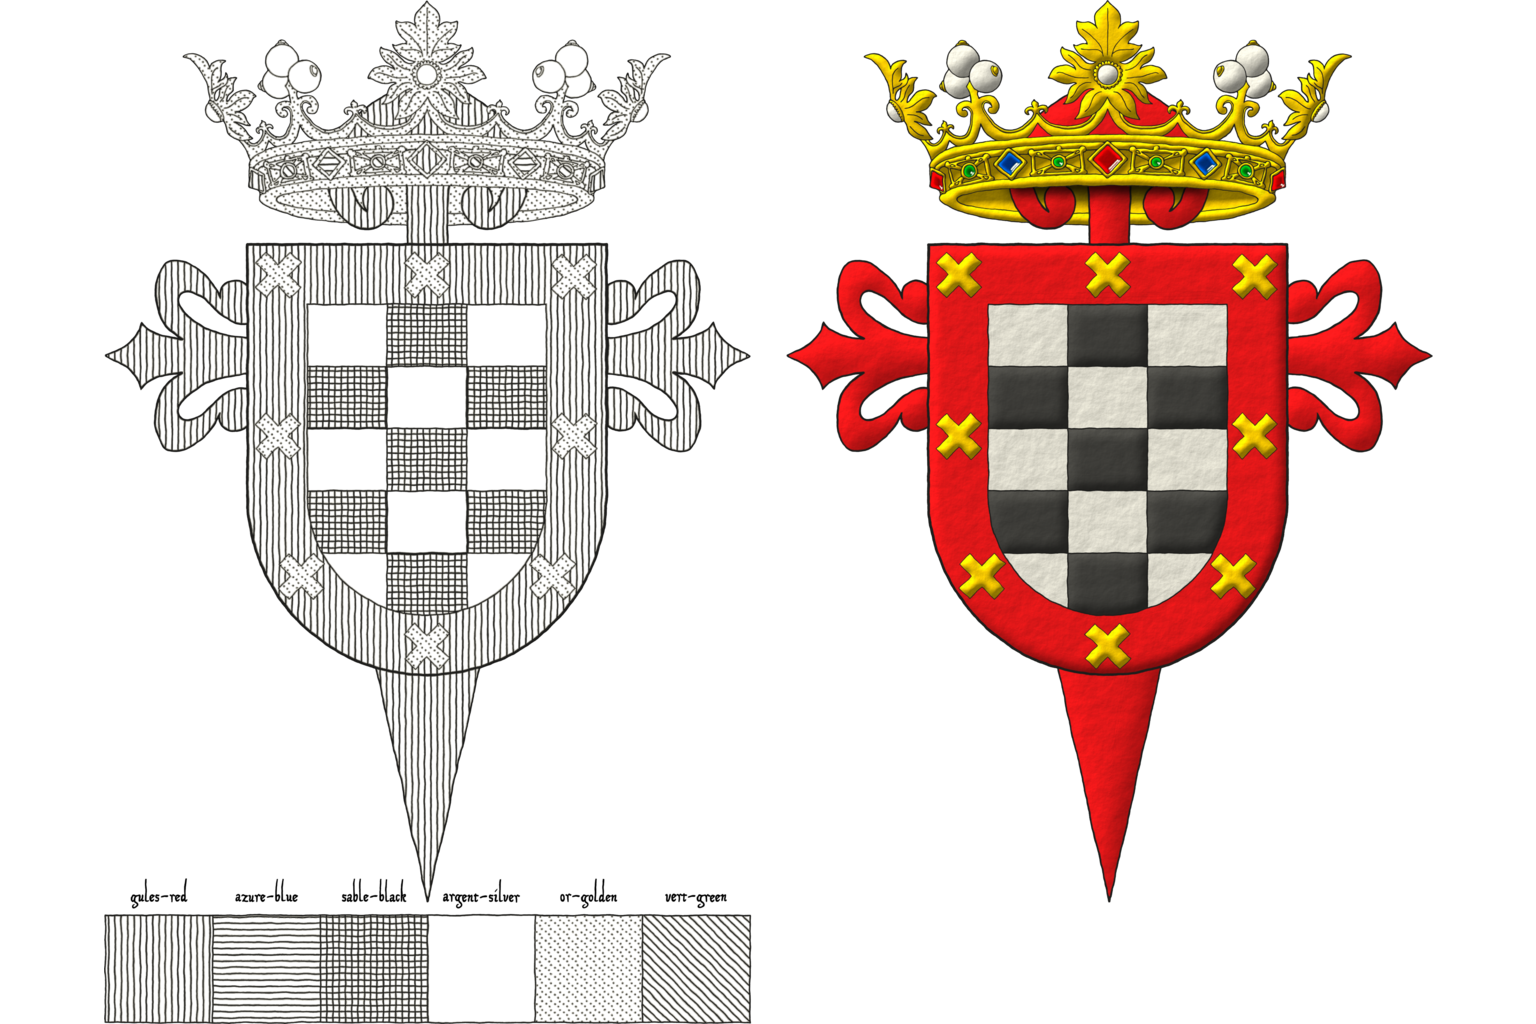 Chequey of fifteen Argent and Sable; on a bordure Gules, eight Saltires couped Or. Crest: A crown of Marquise. Behind the shield the cross of the Order of Saint James